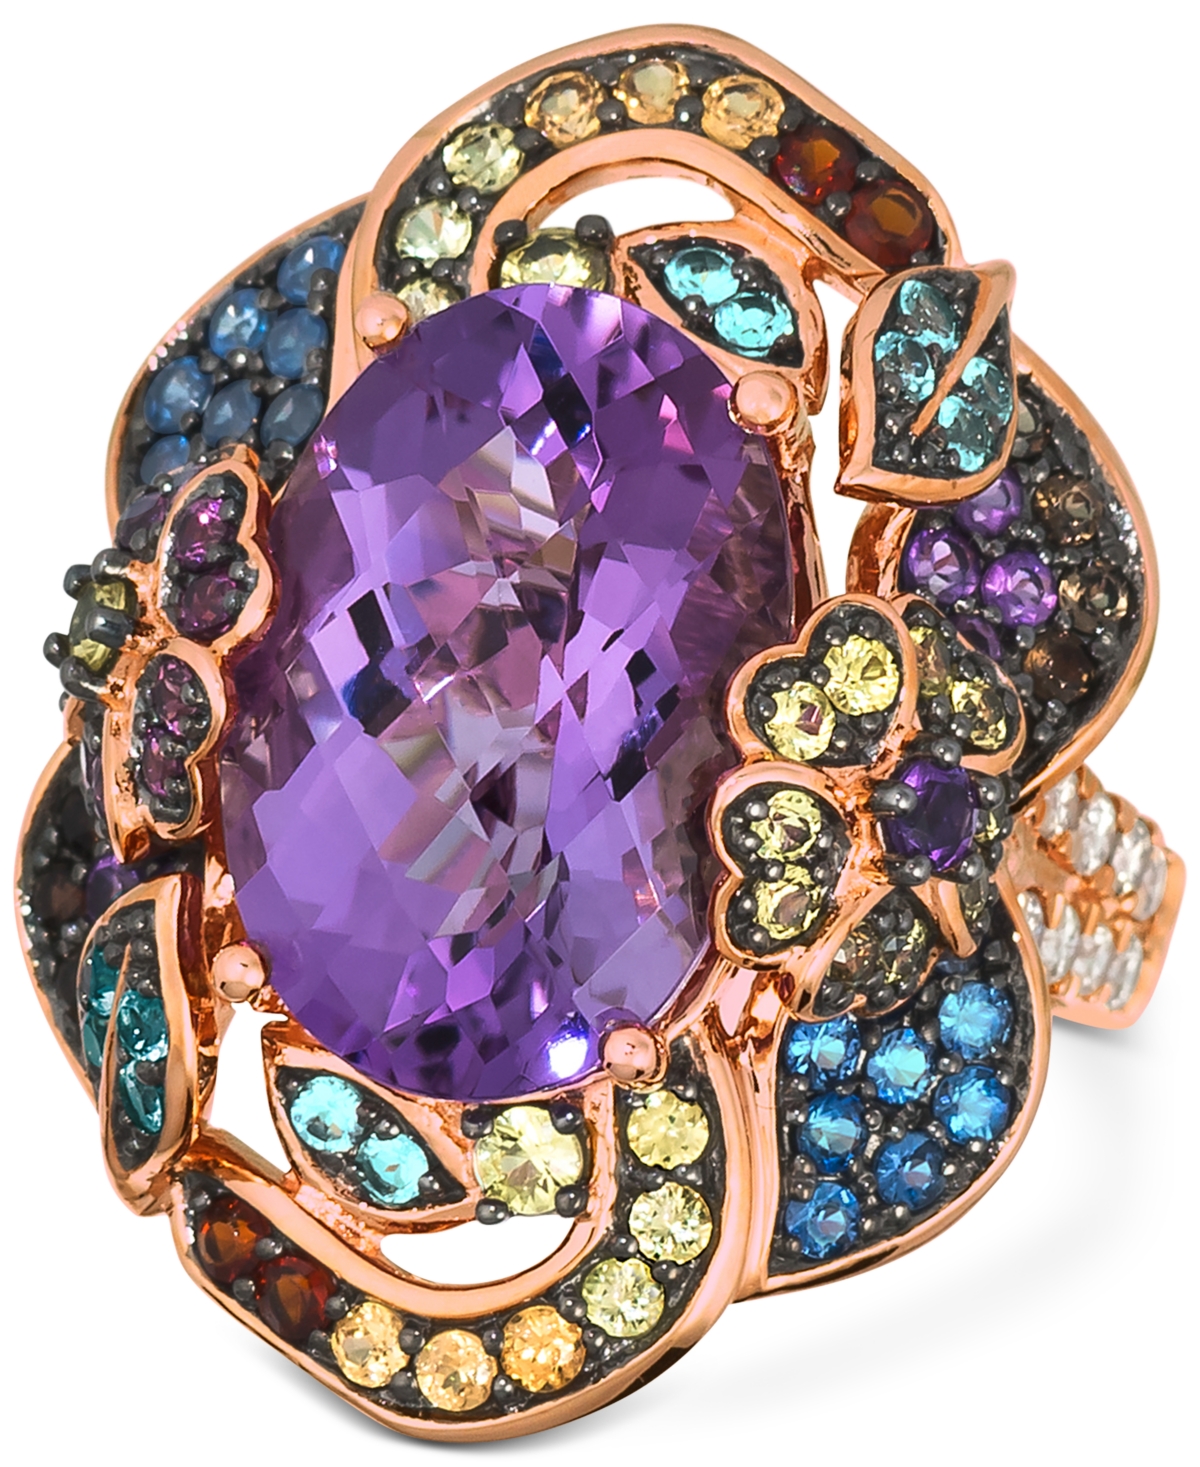 Crazy Collection Multi-Gemstone (7-7/8 ct. t.w.) & Nude Diamond (3/8 ct. t.w.) Statement Ring in 14k Rose Gold - Amethyst